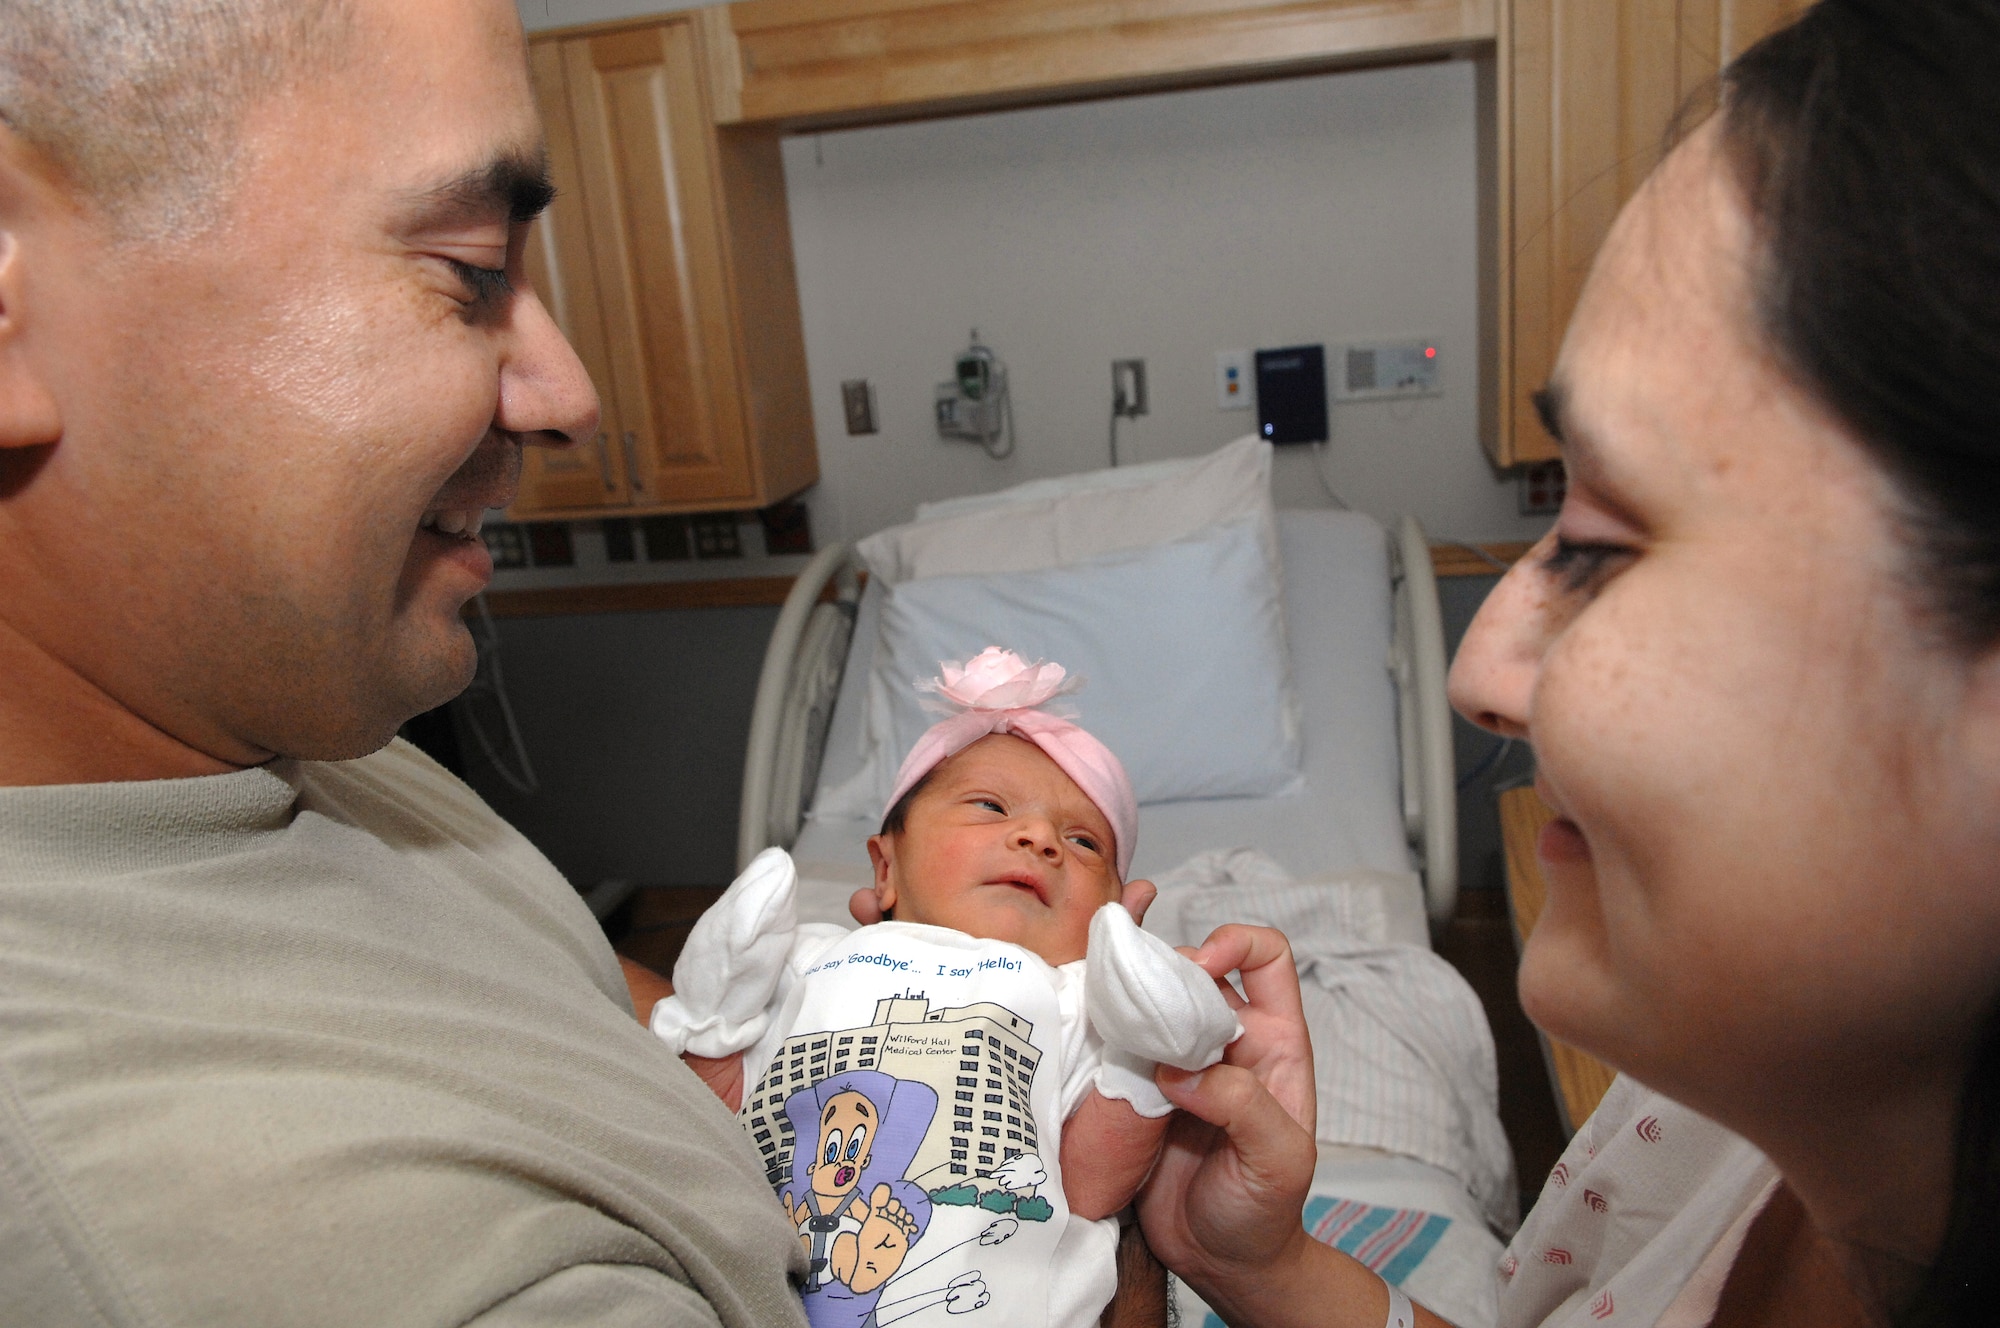 Proud parents Army Staff Sgt. Mario Perez and wife Dina were surprised to hear their new infant, Laurel Perez, was the last baby to be born at Wilford Hall Medical Center, Lackland Air Force Base, Texas on Aug. 28, 2011. The Hauth Birthing Center, known for its worldwide tertiary referral center and premier tri-service teaching facility, is relocating across town to Fort Sam Houston to a state-of-the art facility. The move will establish an integrated medical team of top-notch Air Force and Army staff. (U.S. Air Force photo/Staff Sgt. Robert Barnett) 